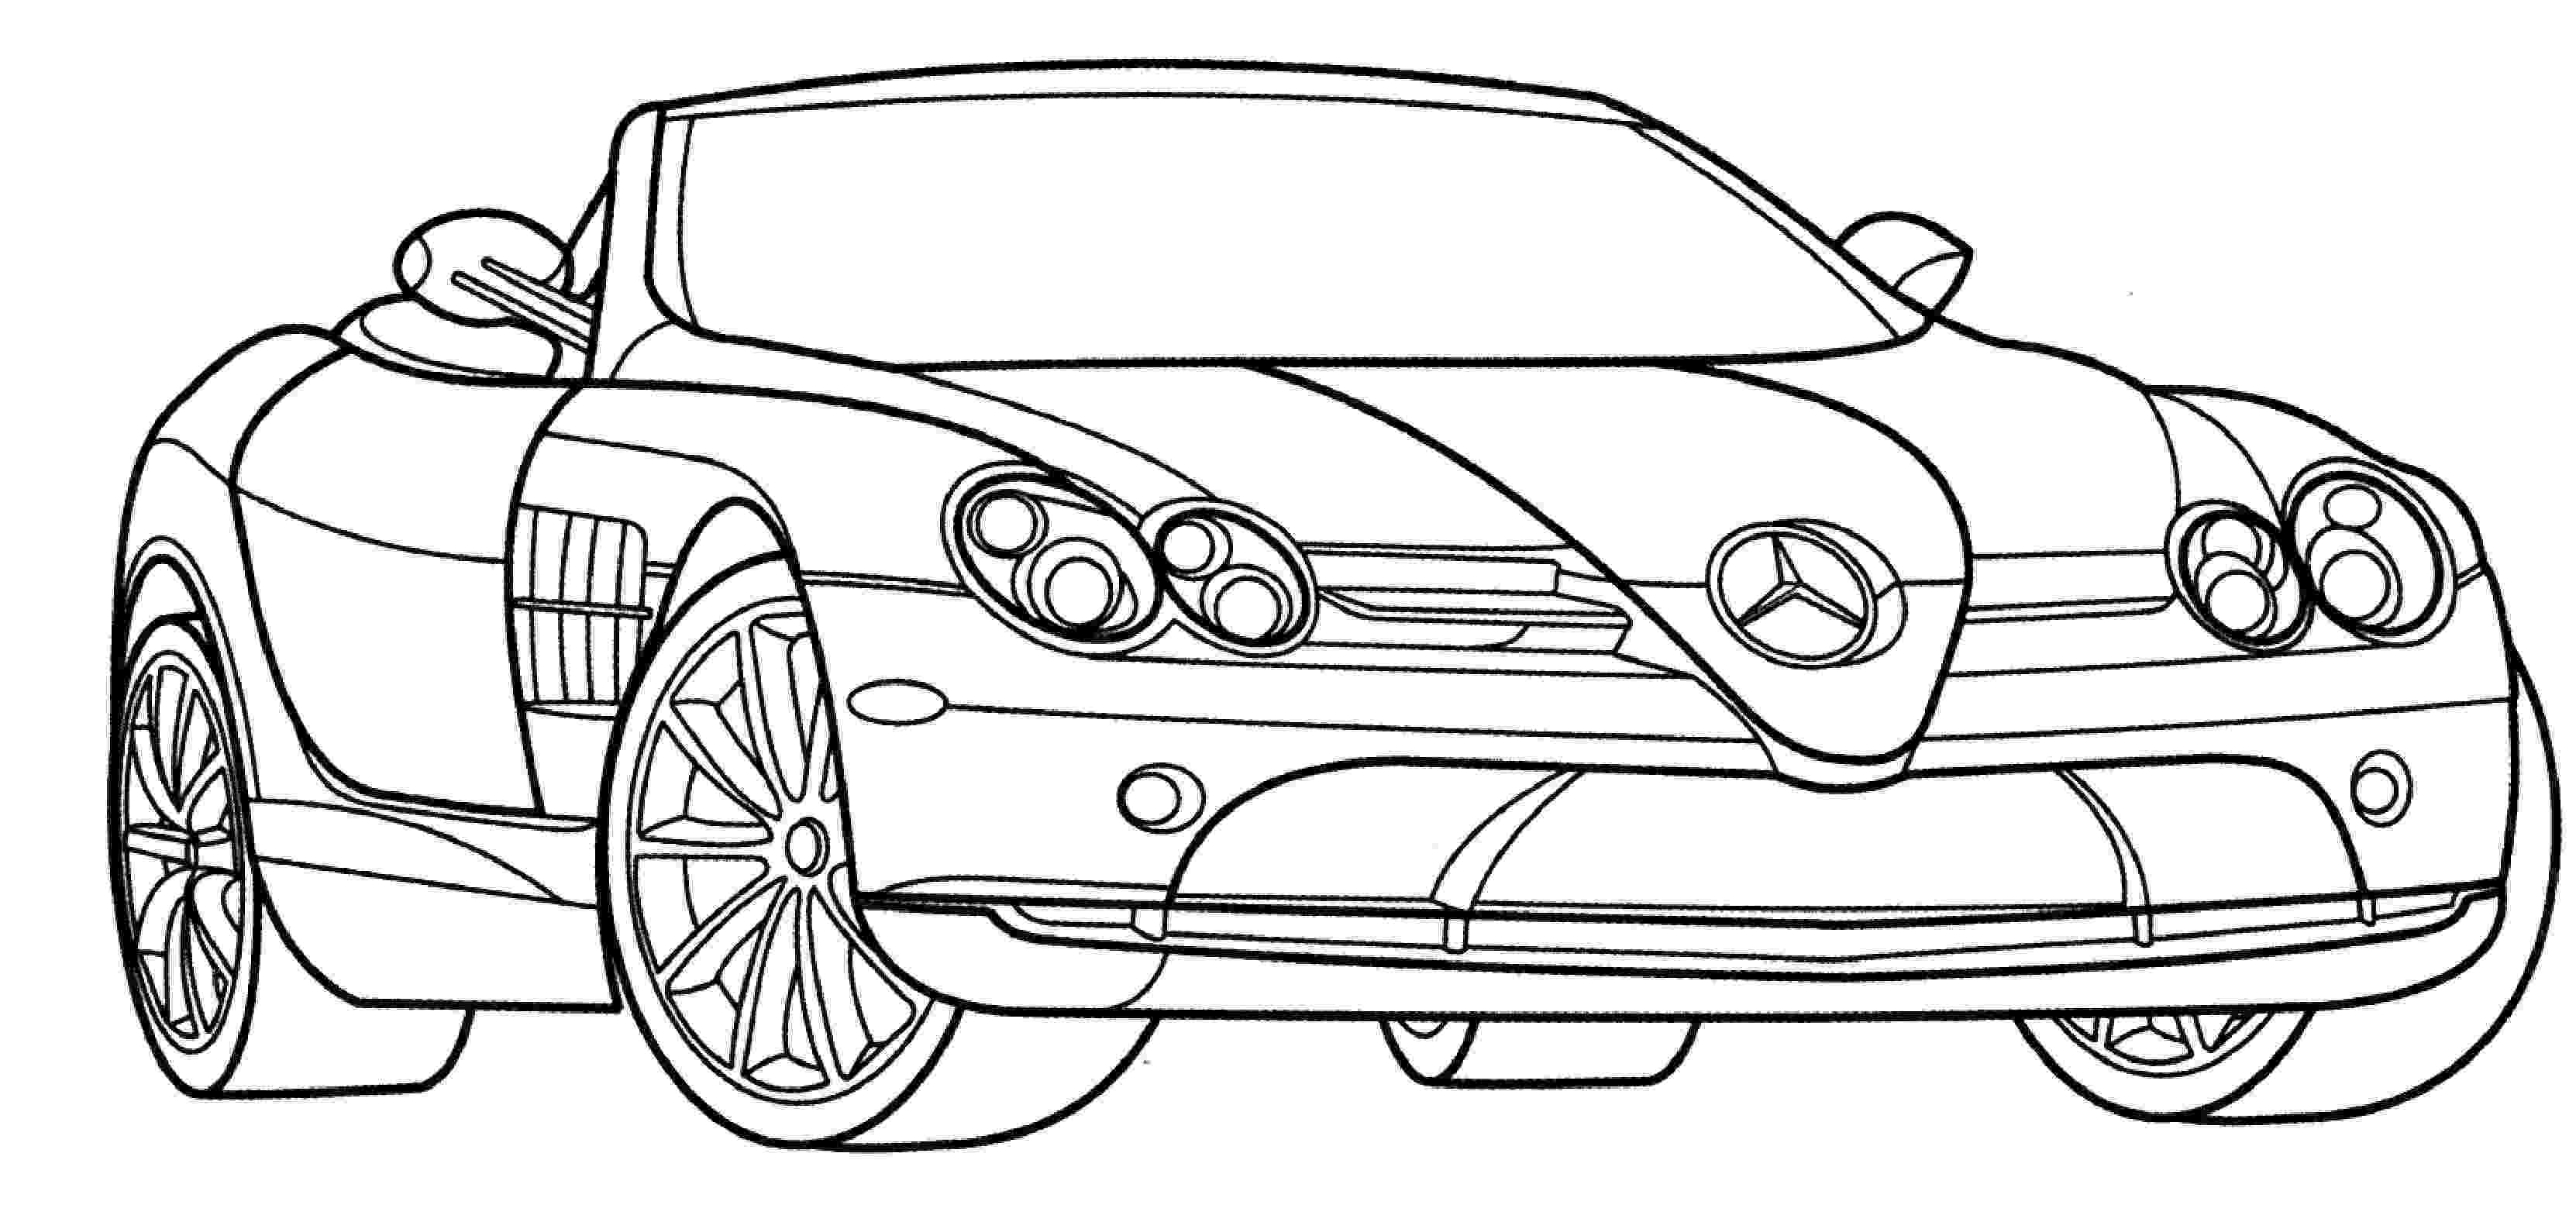 car coloring pages for adults sports cars coloring pages bing images cars coloring adults for coloring car pages 